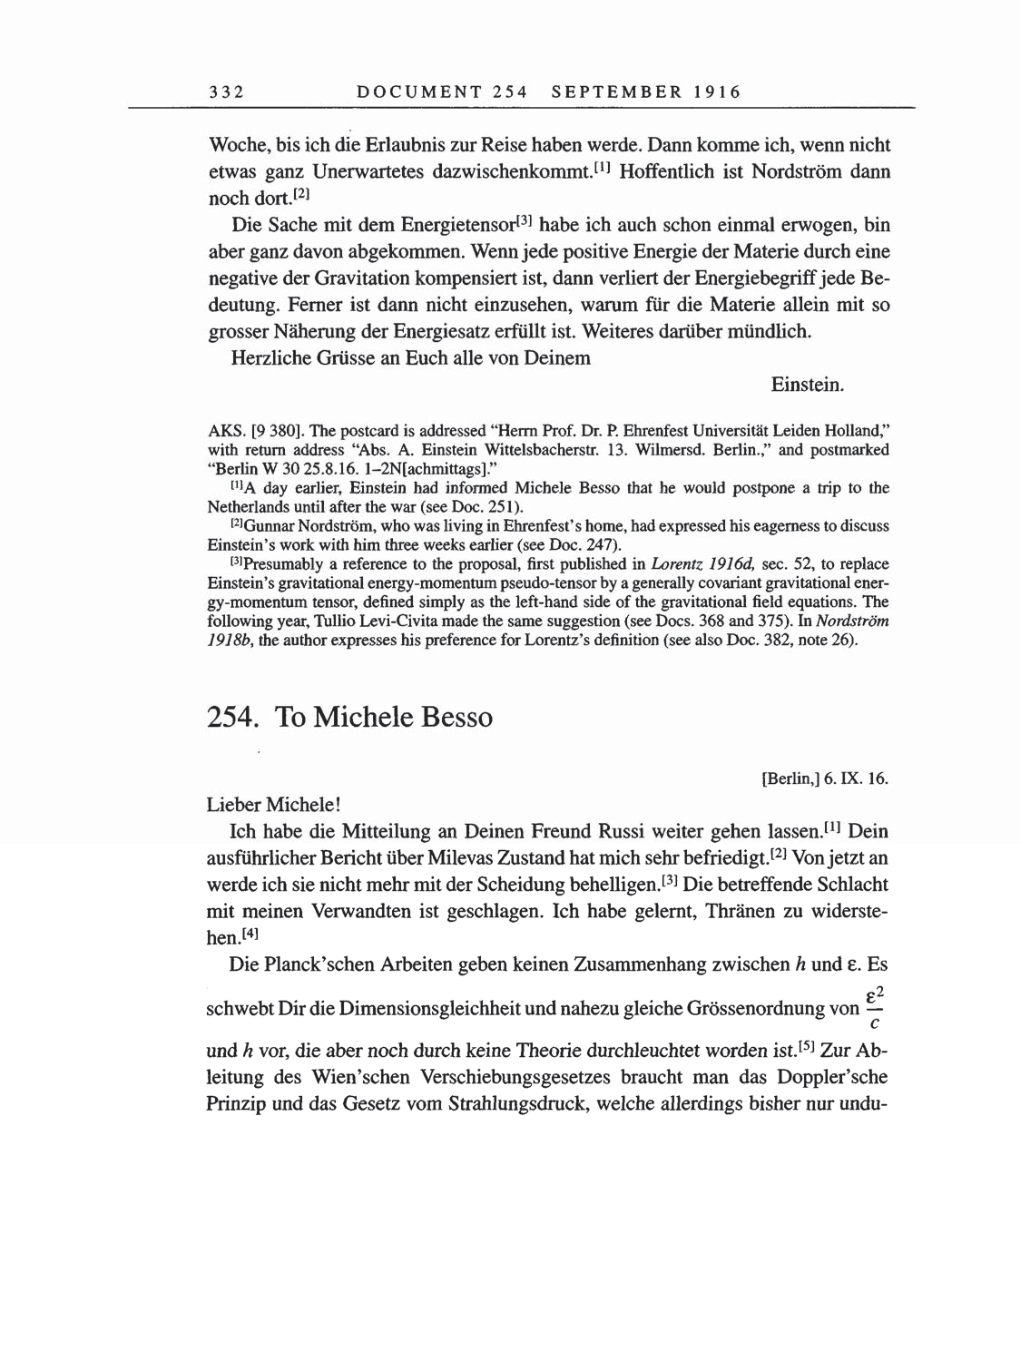 Volume 8, Part A: The Berlin Years: Correspondence 1914-1917 page 332